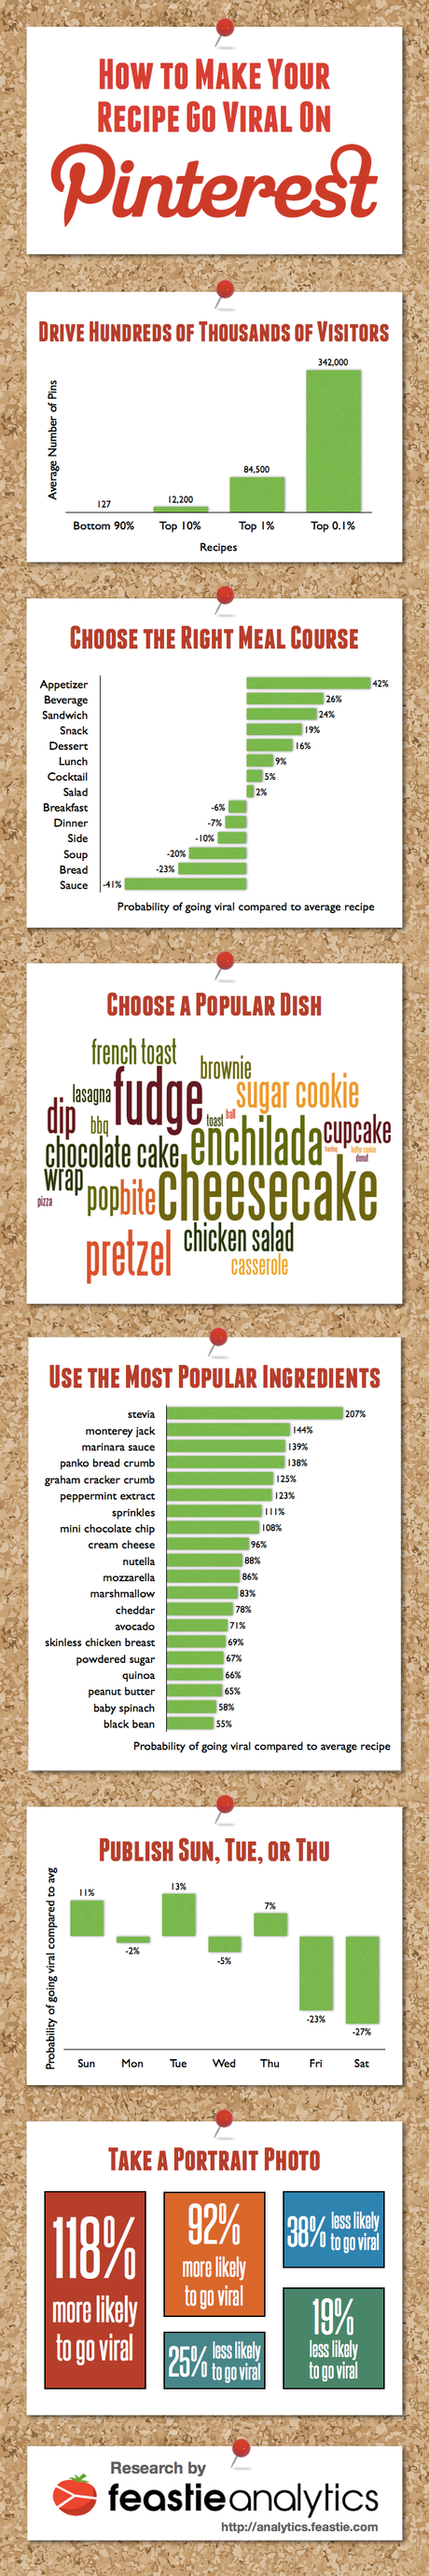 Pinterest Infographic How To Make Your Recipe Go Viral On Pinterest